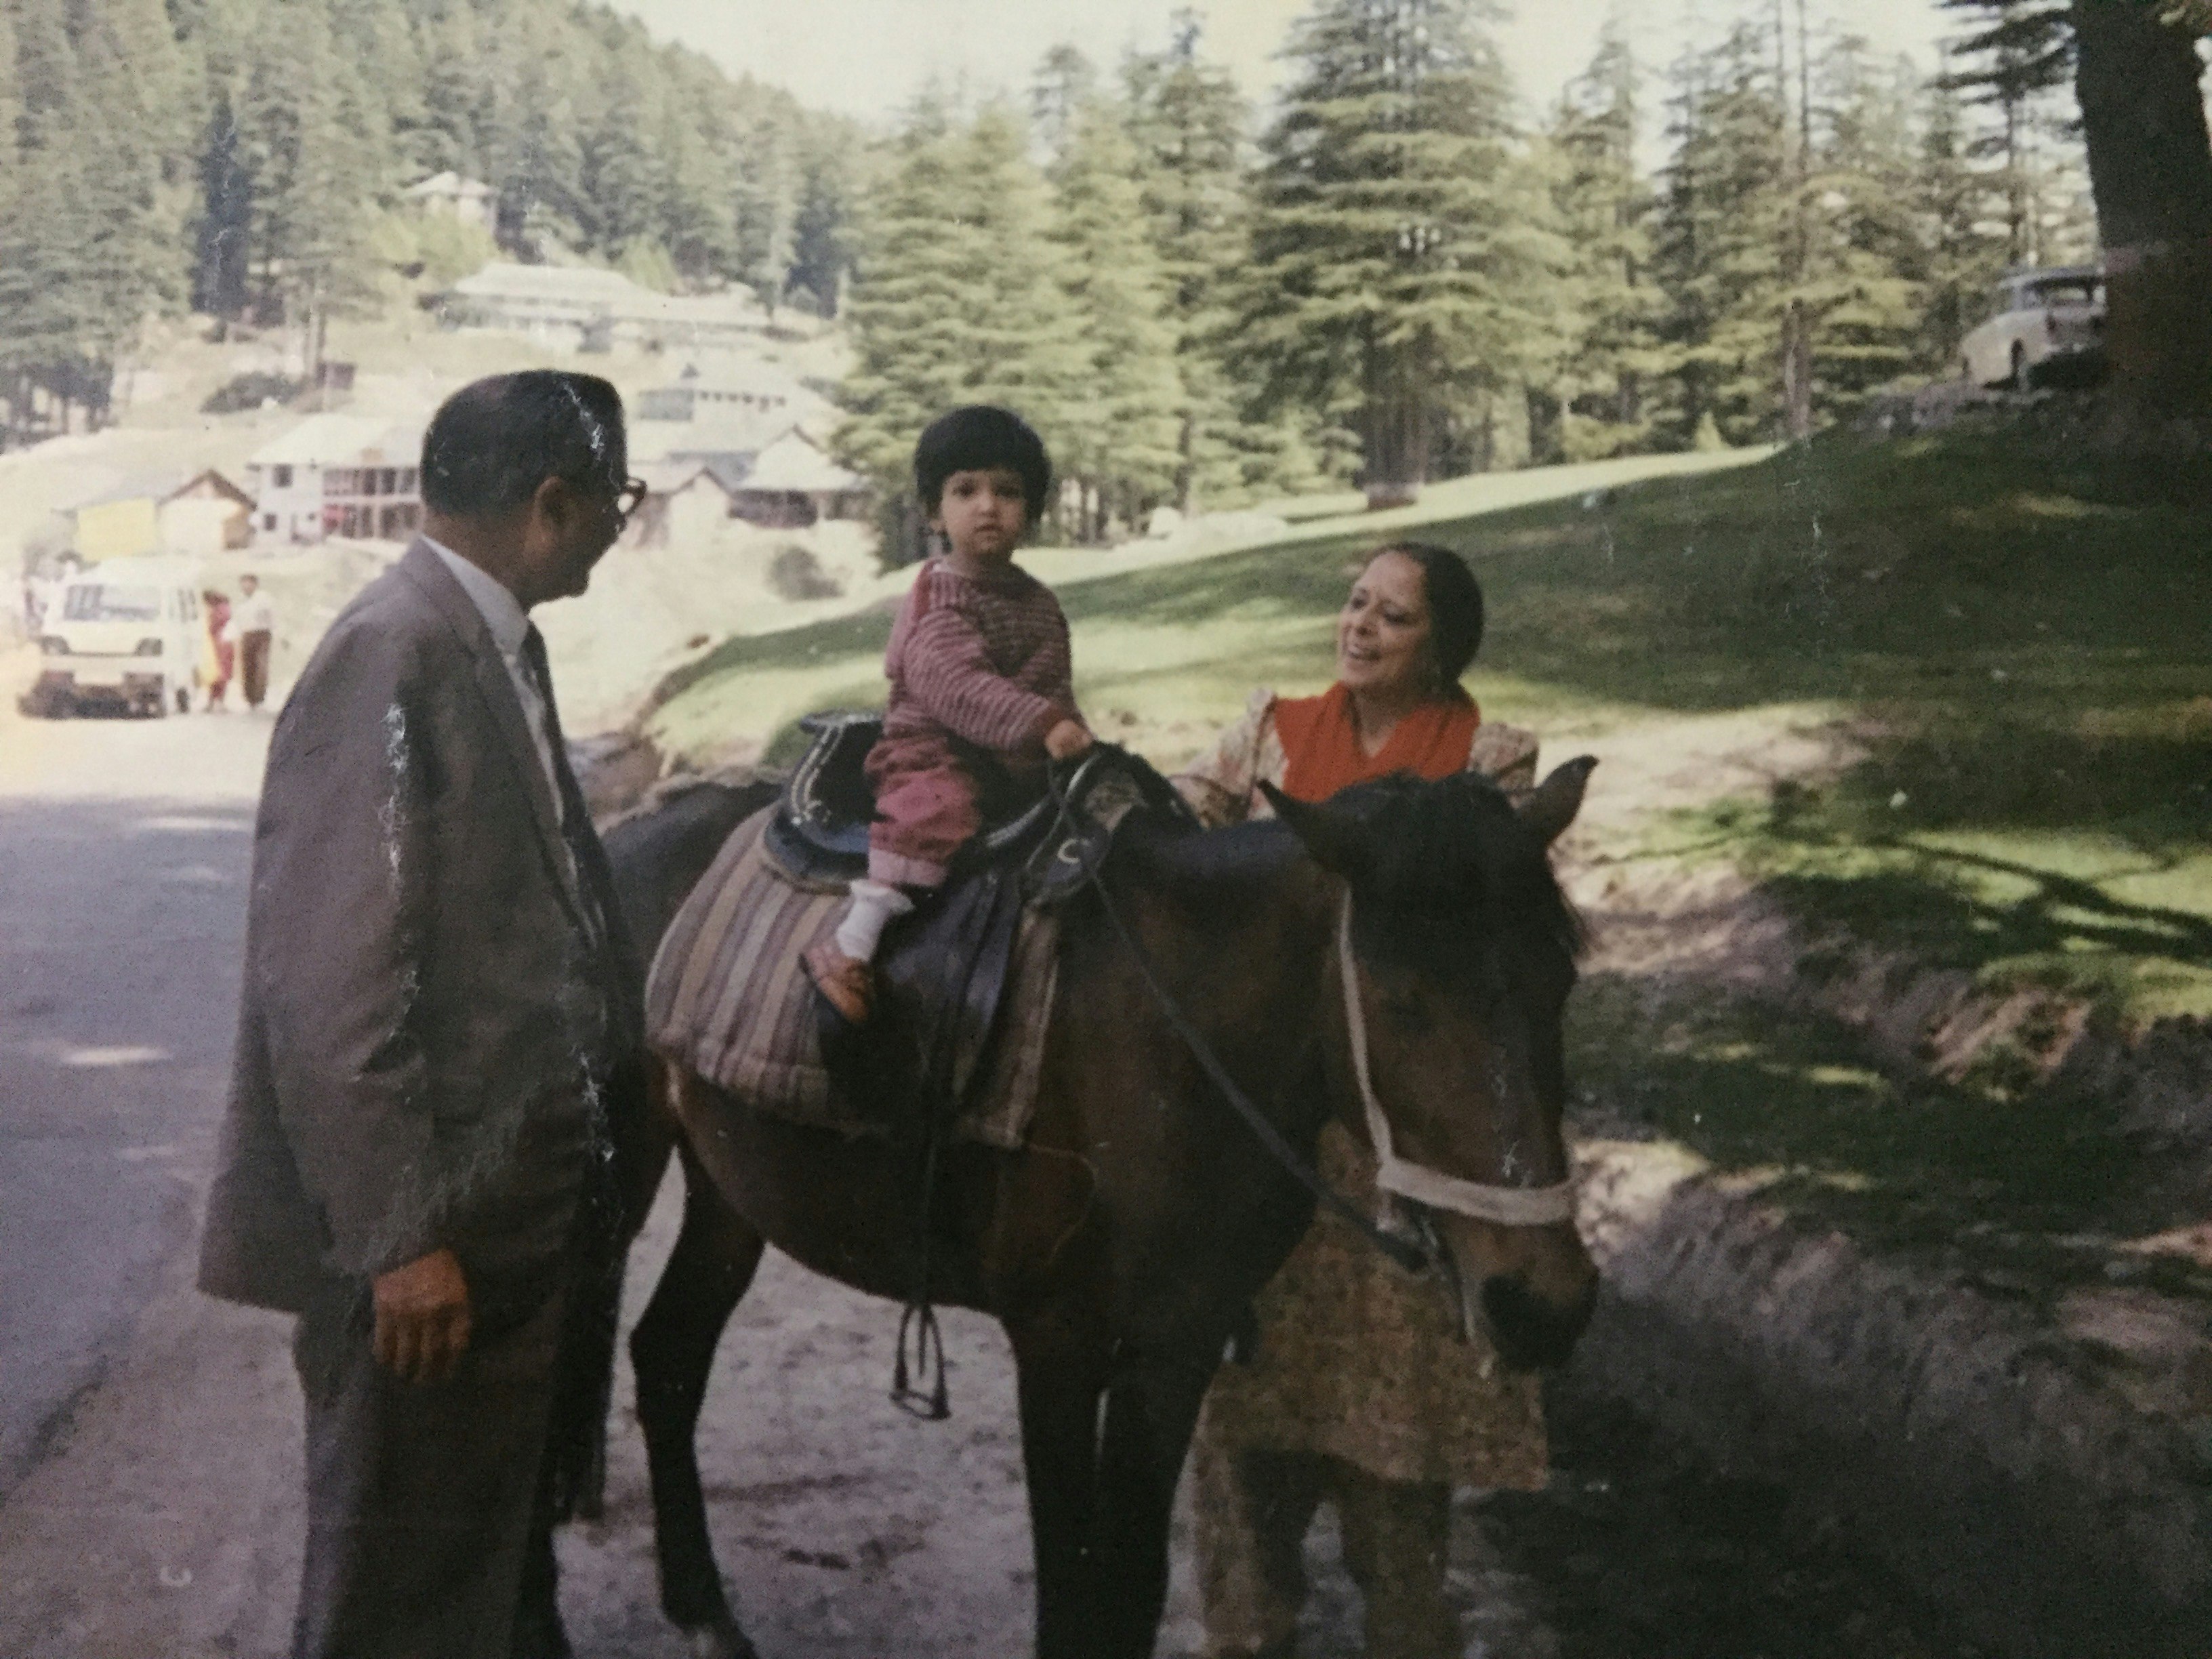 A dated photograph of a young girl riding on the back of a horse, which is being led by two adults. In the background, green forestry and mountain scenery is visible.